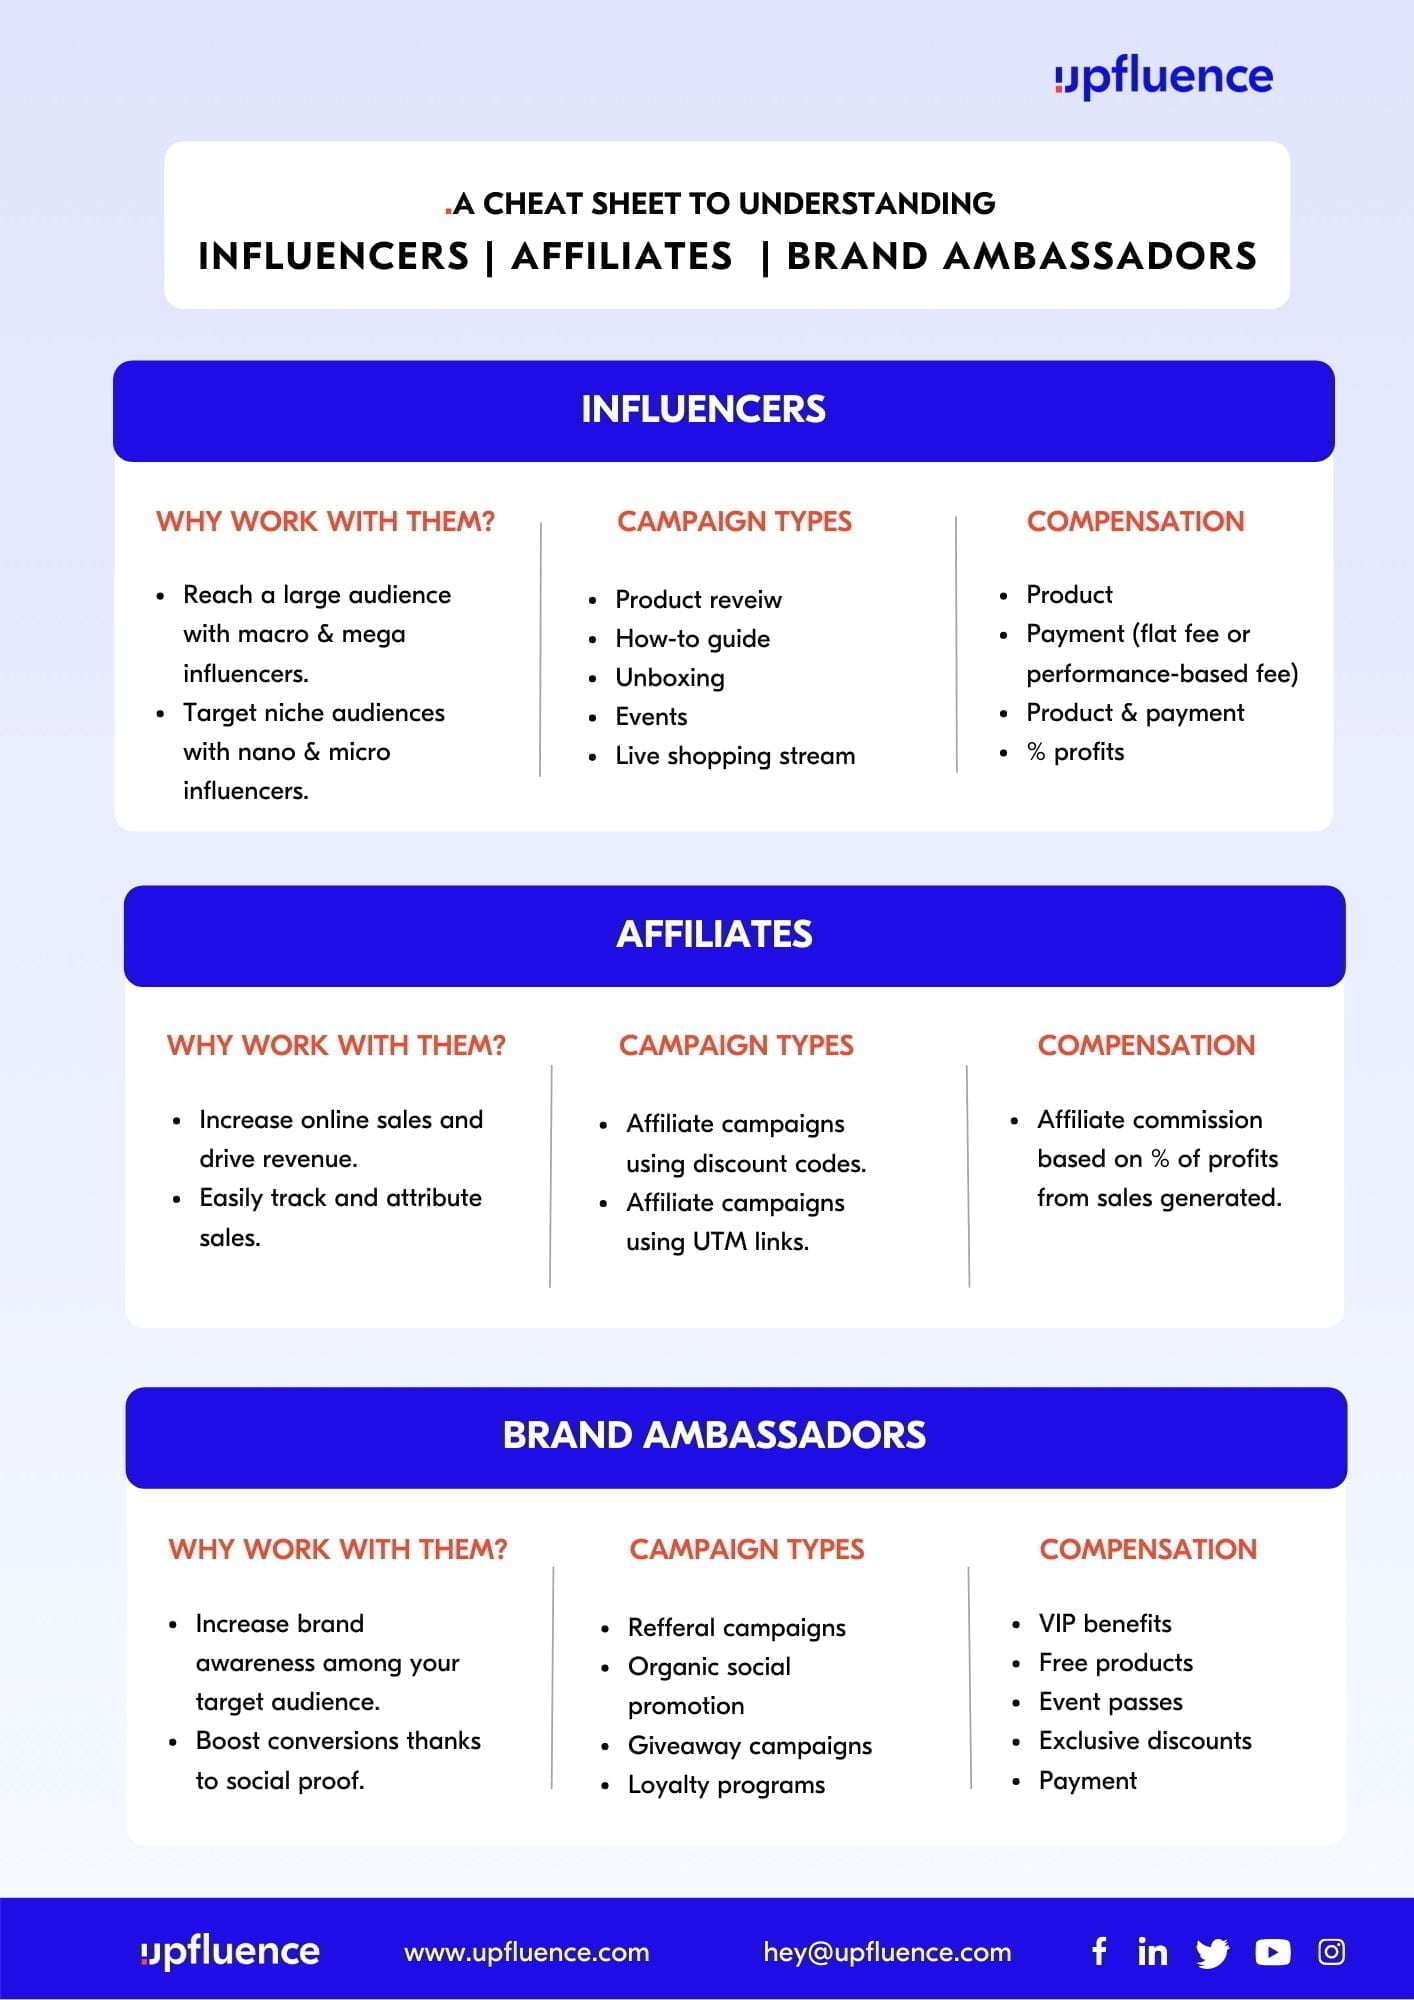 Which is best: brand ambassadors, affiliates or influencers?